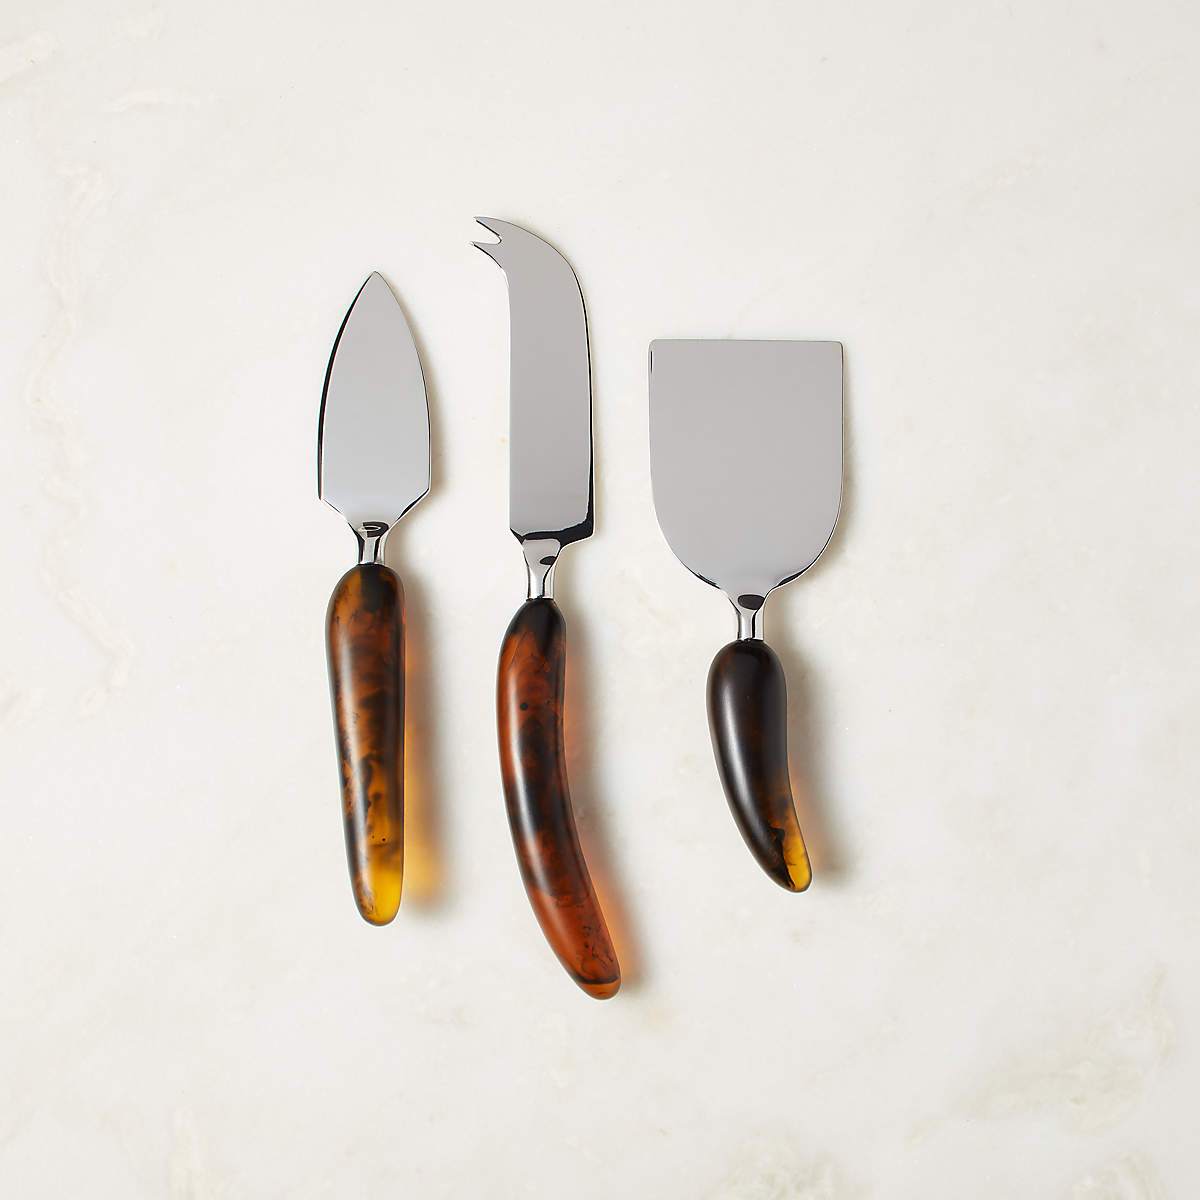 Tomah Resin Cheese Knives Set of 3